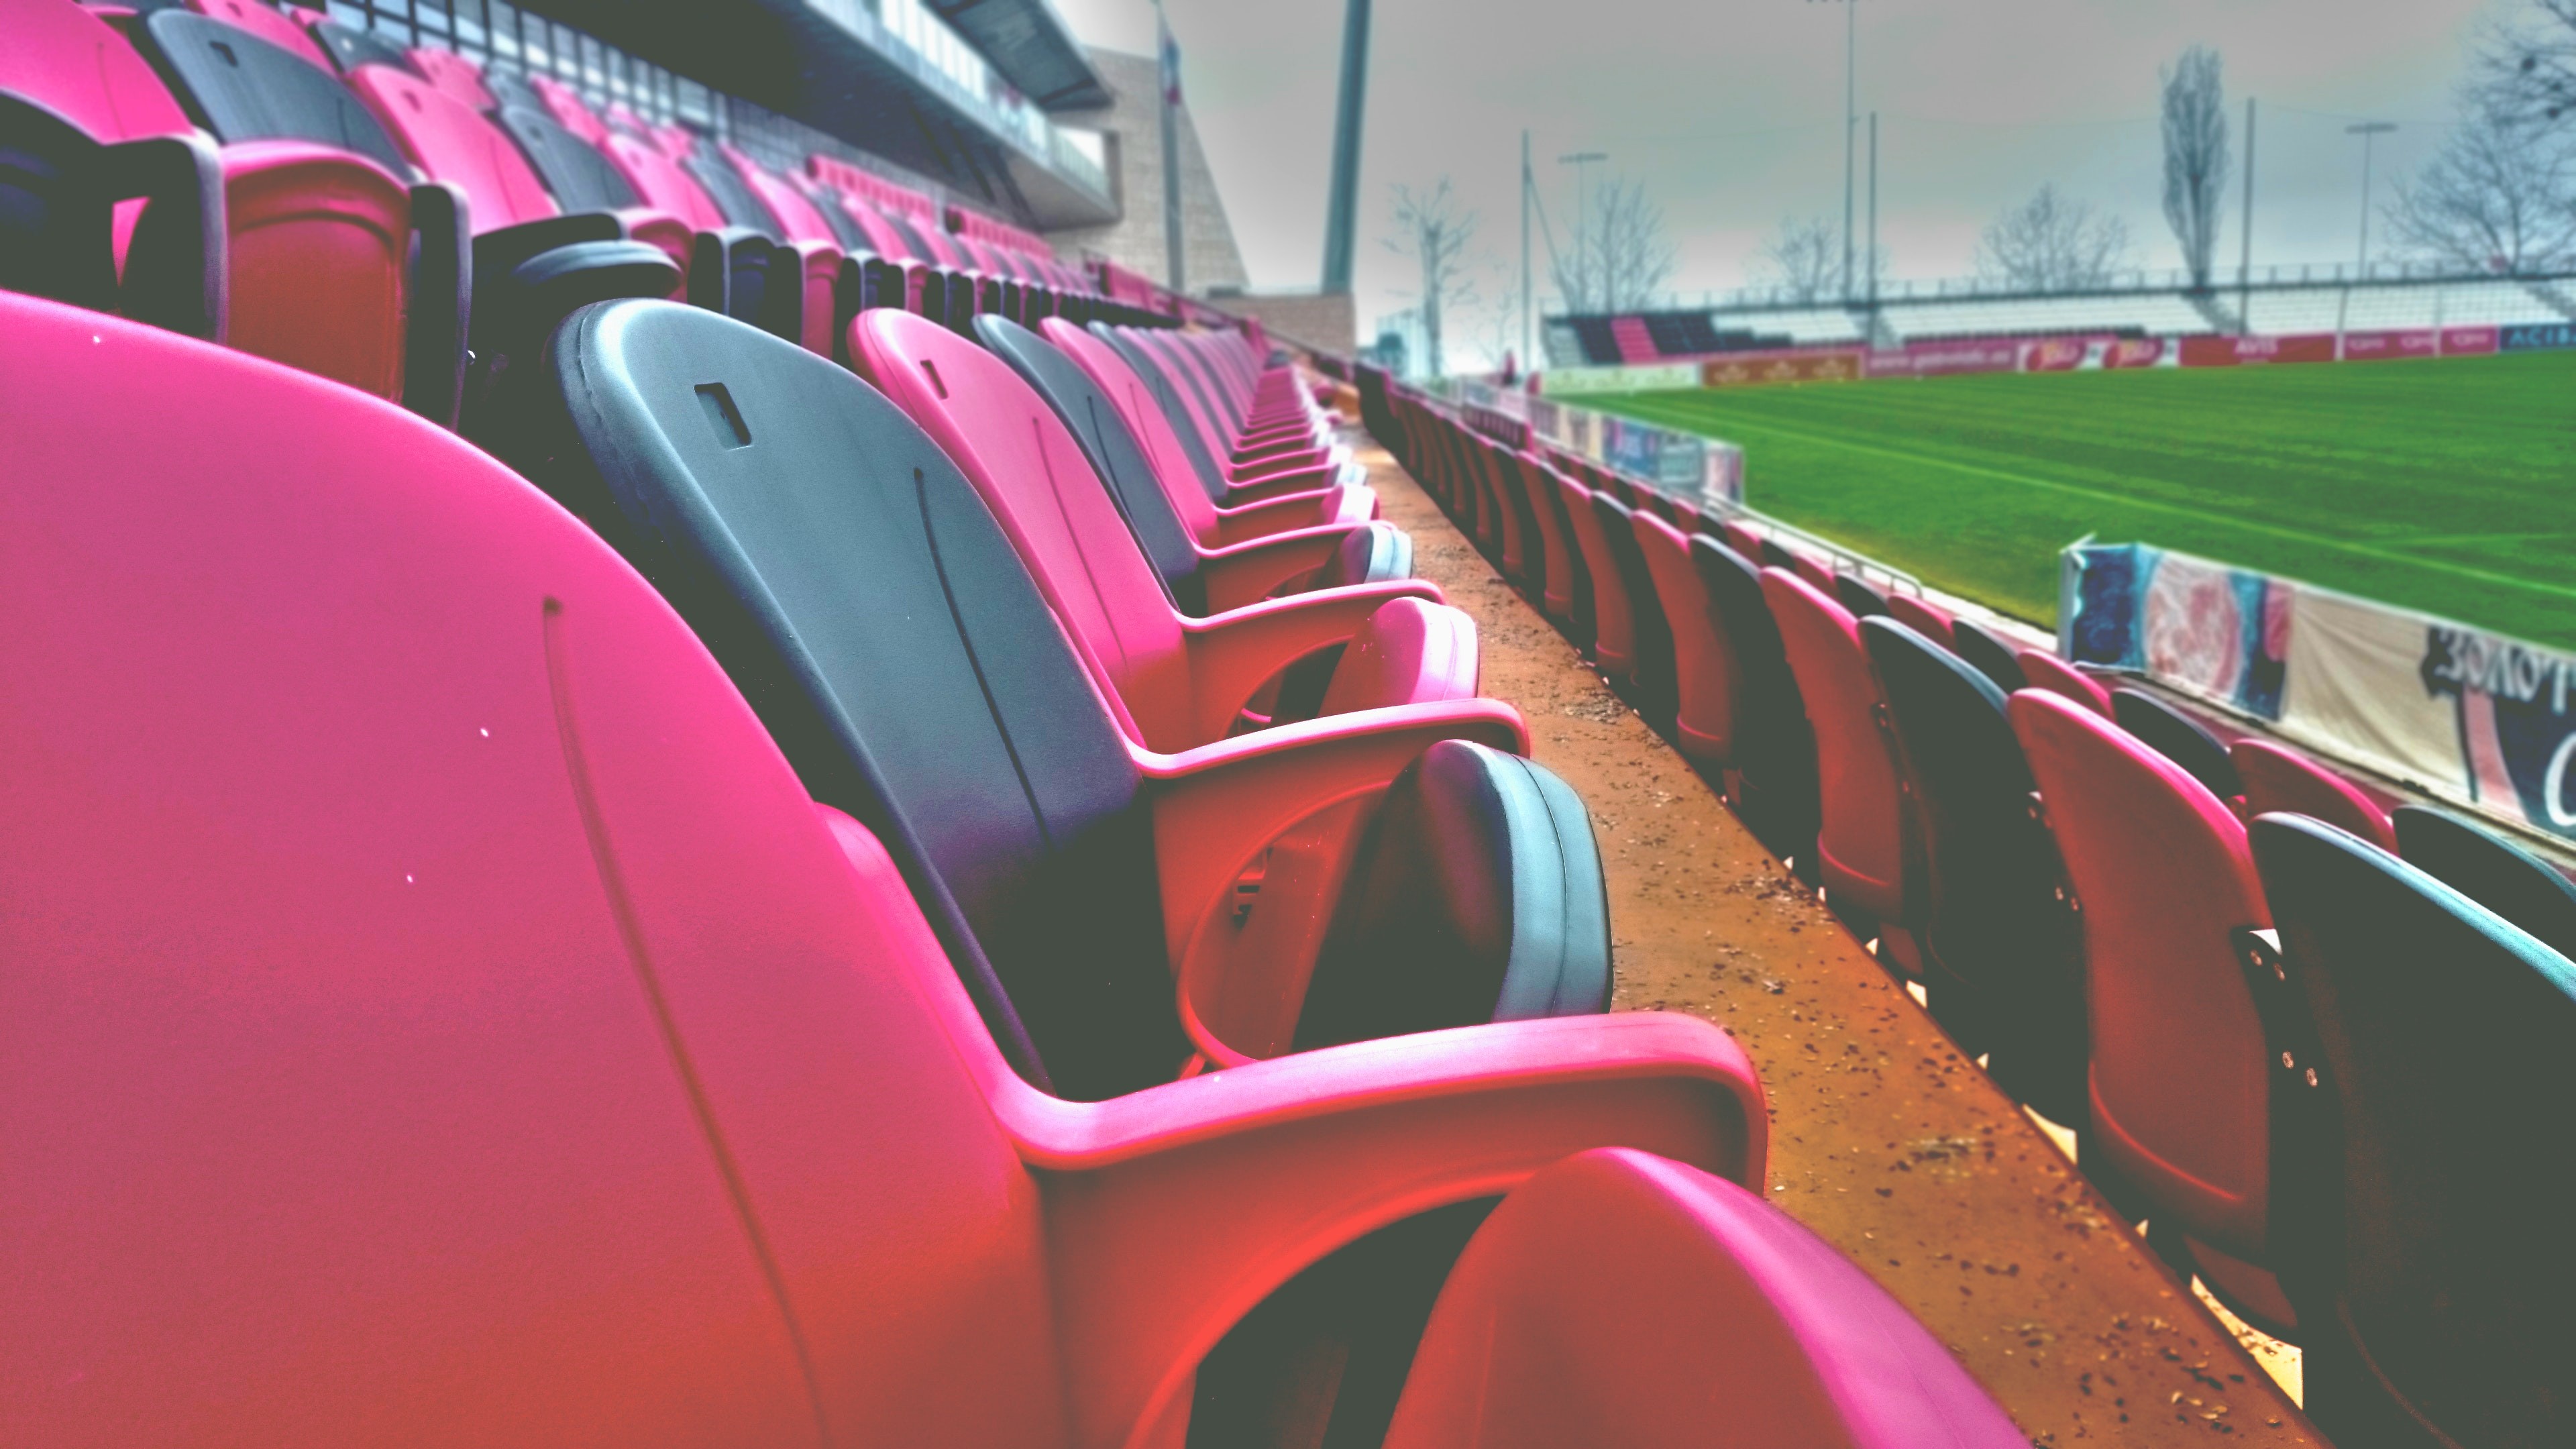 The lack of fans affected the performance of the main teams during the pandemic (Photo: Pexels)